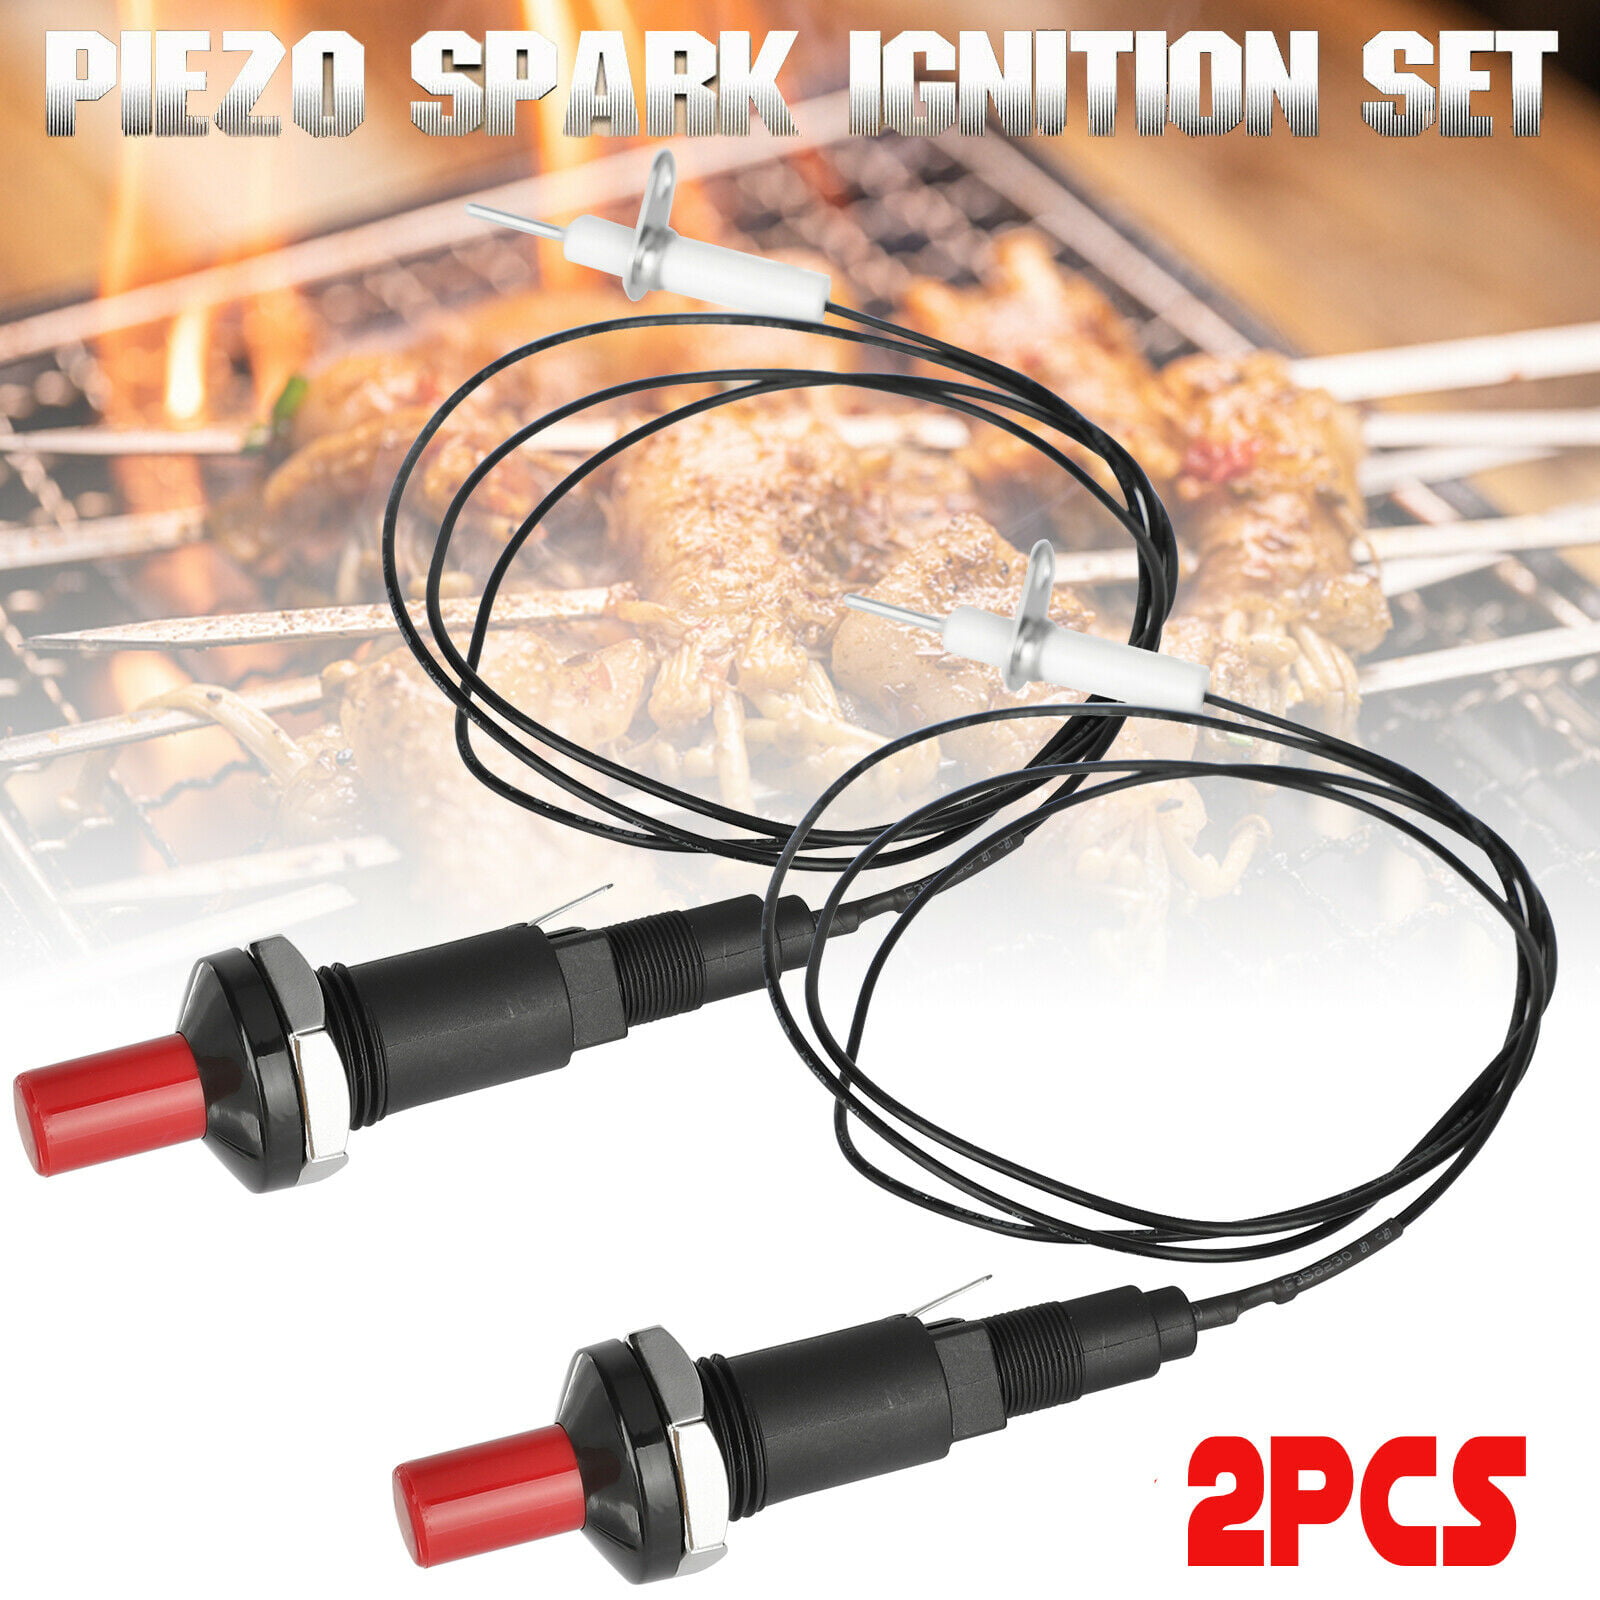 Universal Piezo Spark Ignition Set Cable Push Button Ignitor for Gas Grill BBQ 